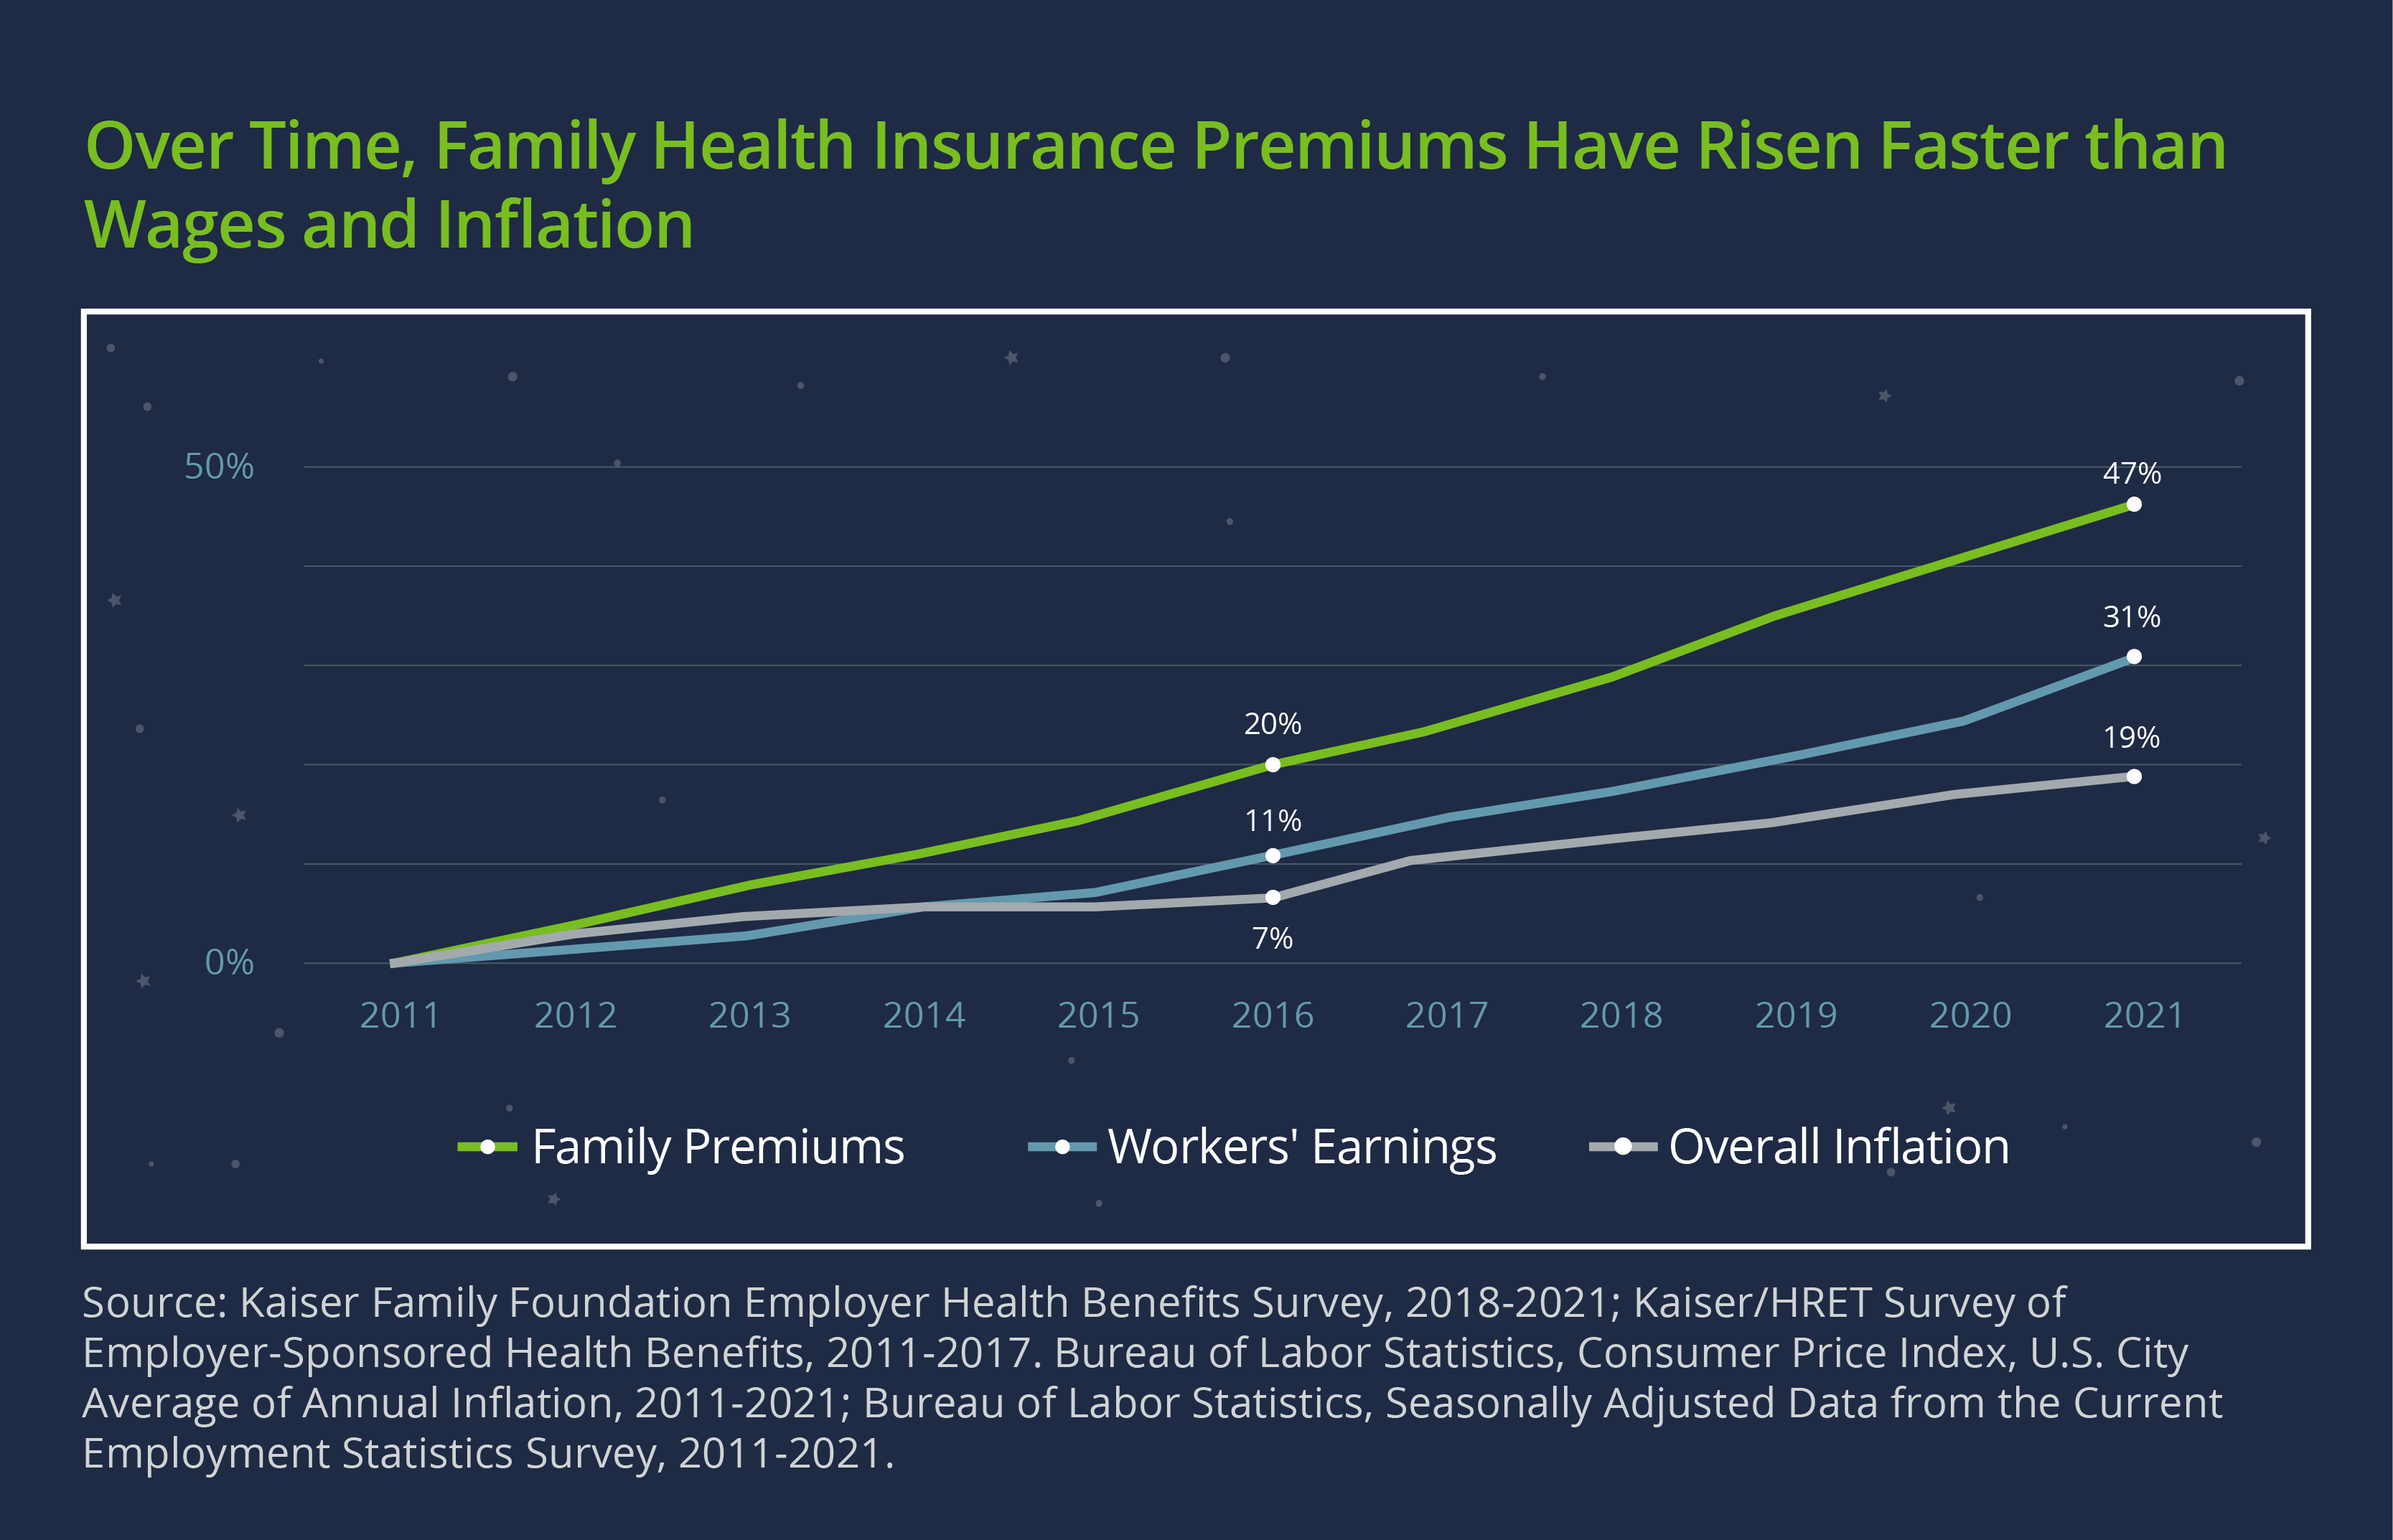 Overall, family health insurance premiums have risen faster than wages and inflation